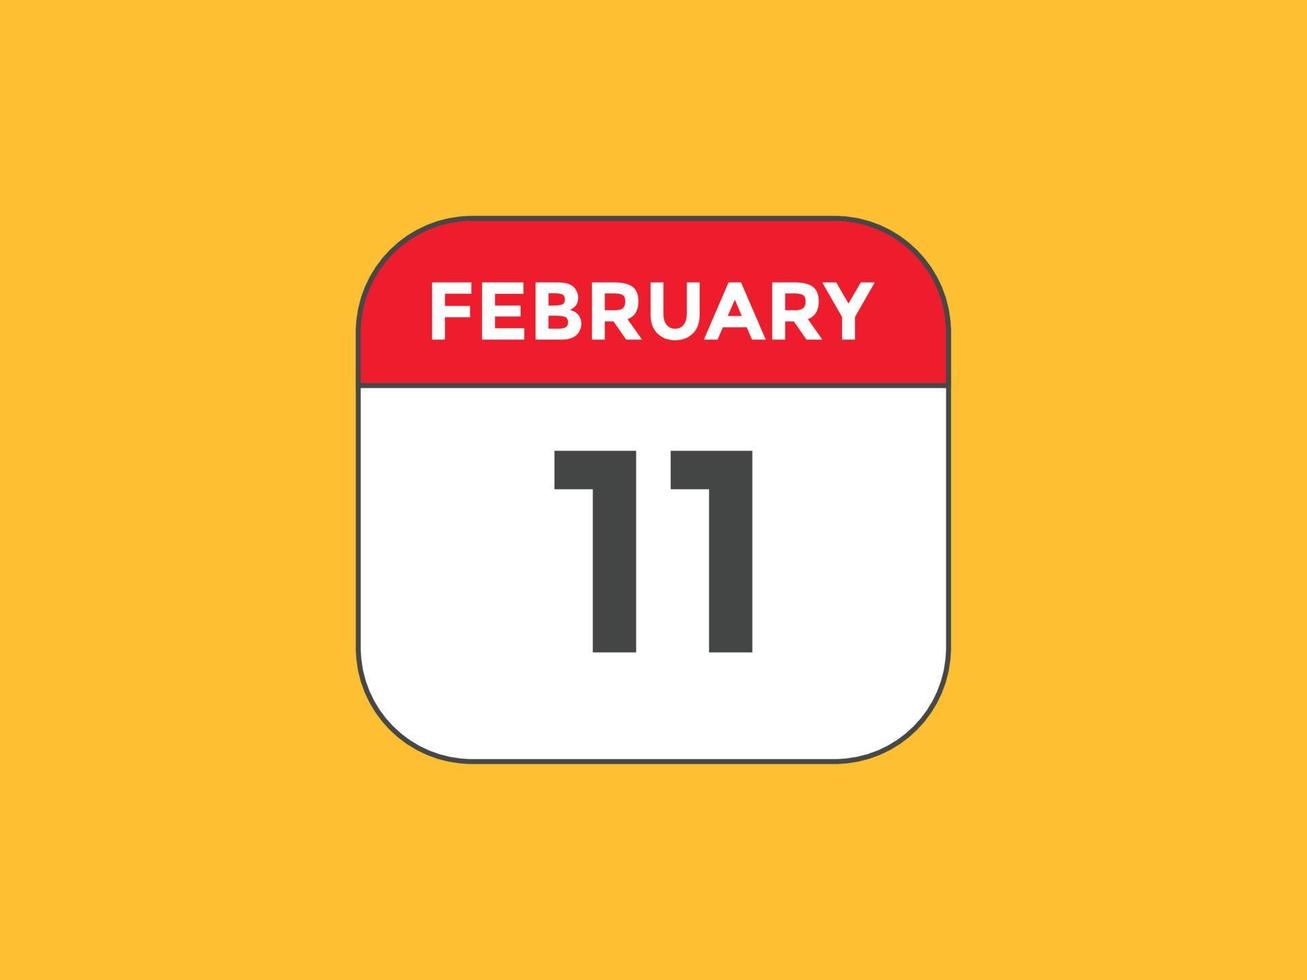 february 11 calendar reminder. 11th february daily calendar icon template. Calendar 11th february icon Design template. Vector illustration